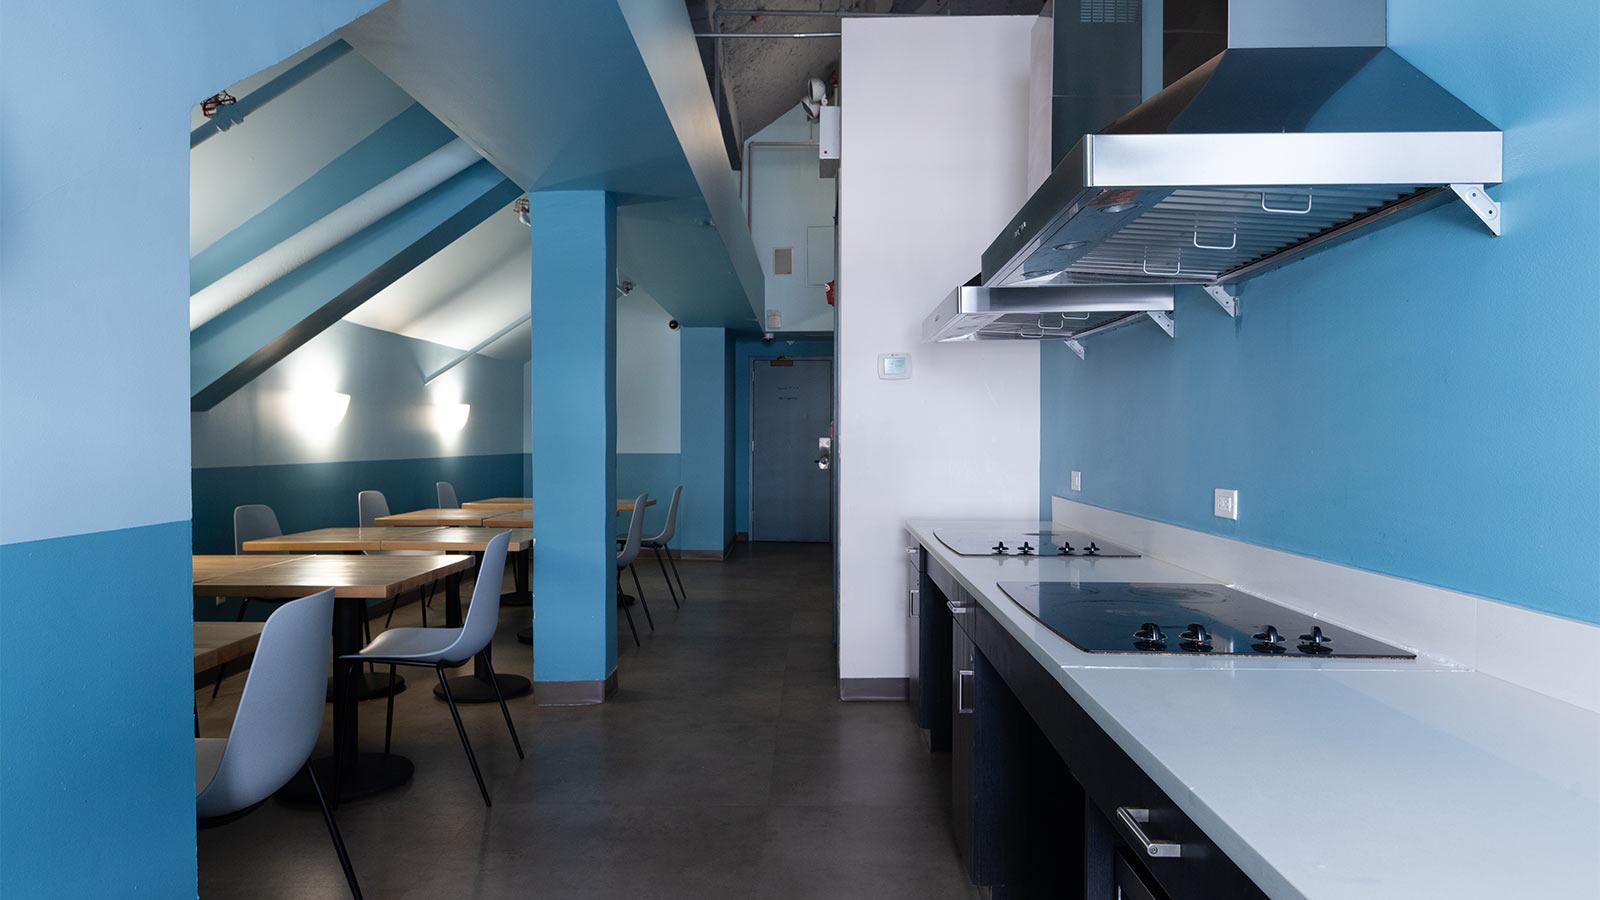 Shared Kitchen and Lounge at 55 John Street on the Pace University Campus in New York City